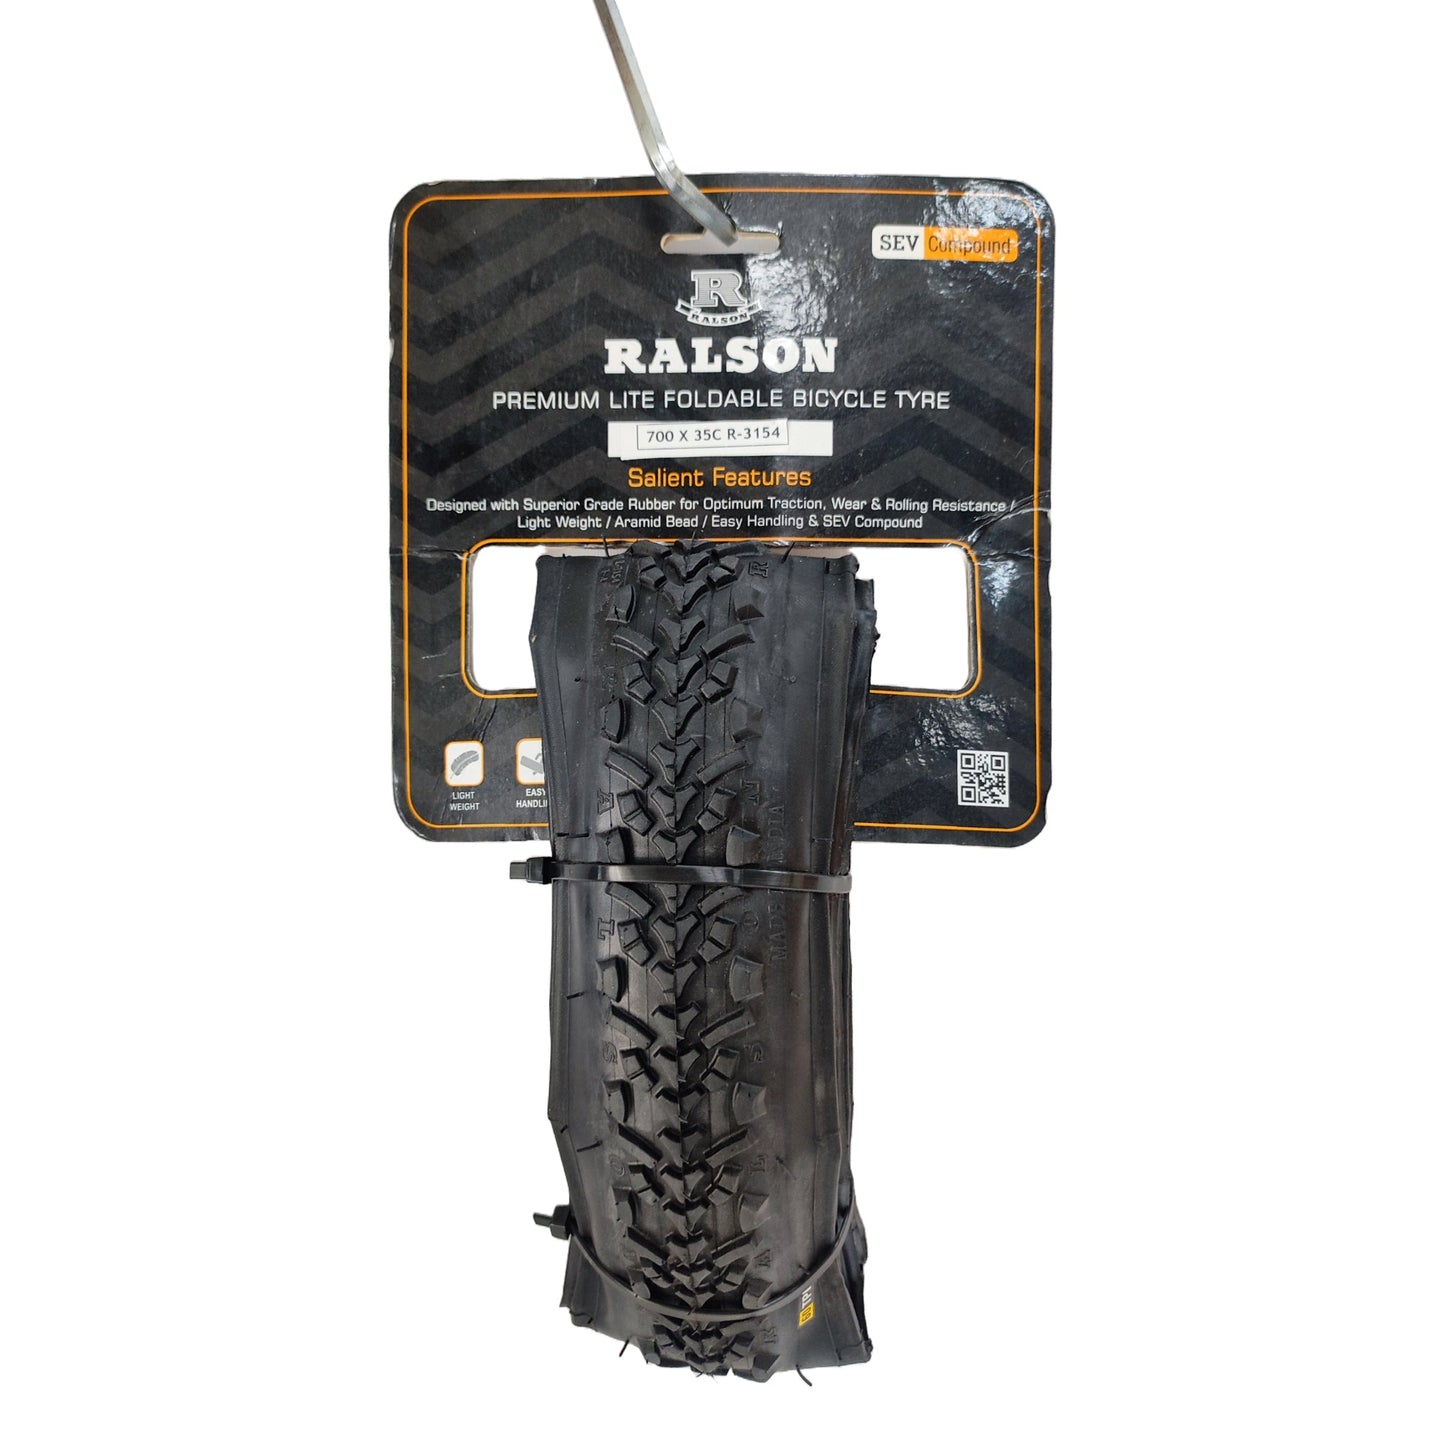 Bicycle tyre for hybrid bike, high puncher resistance tyre 60 tpi by ralson packing view 